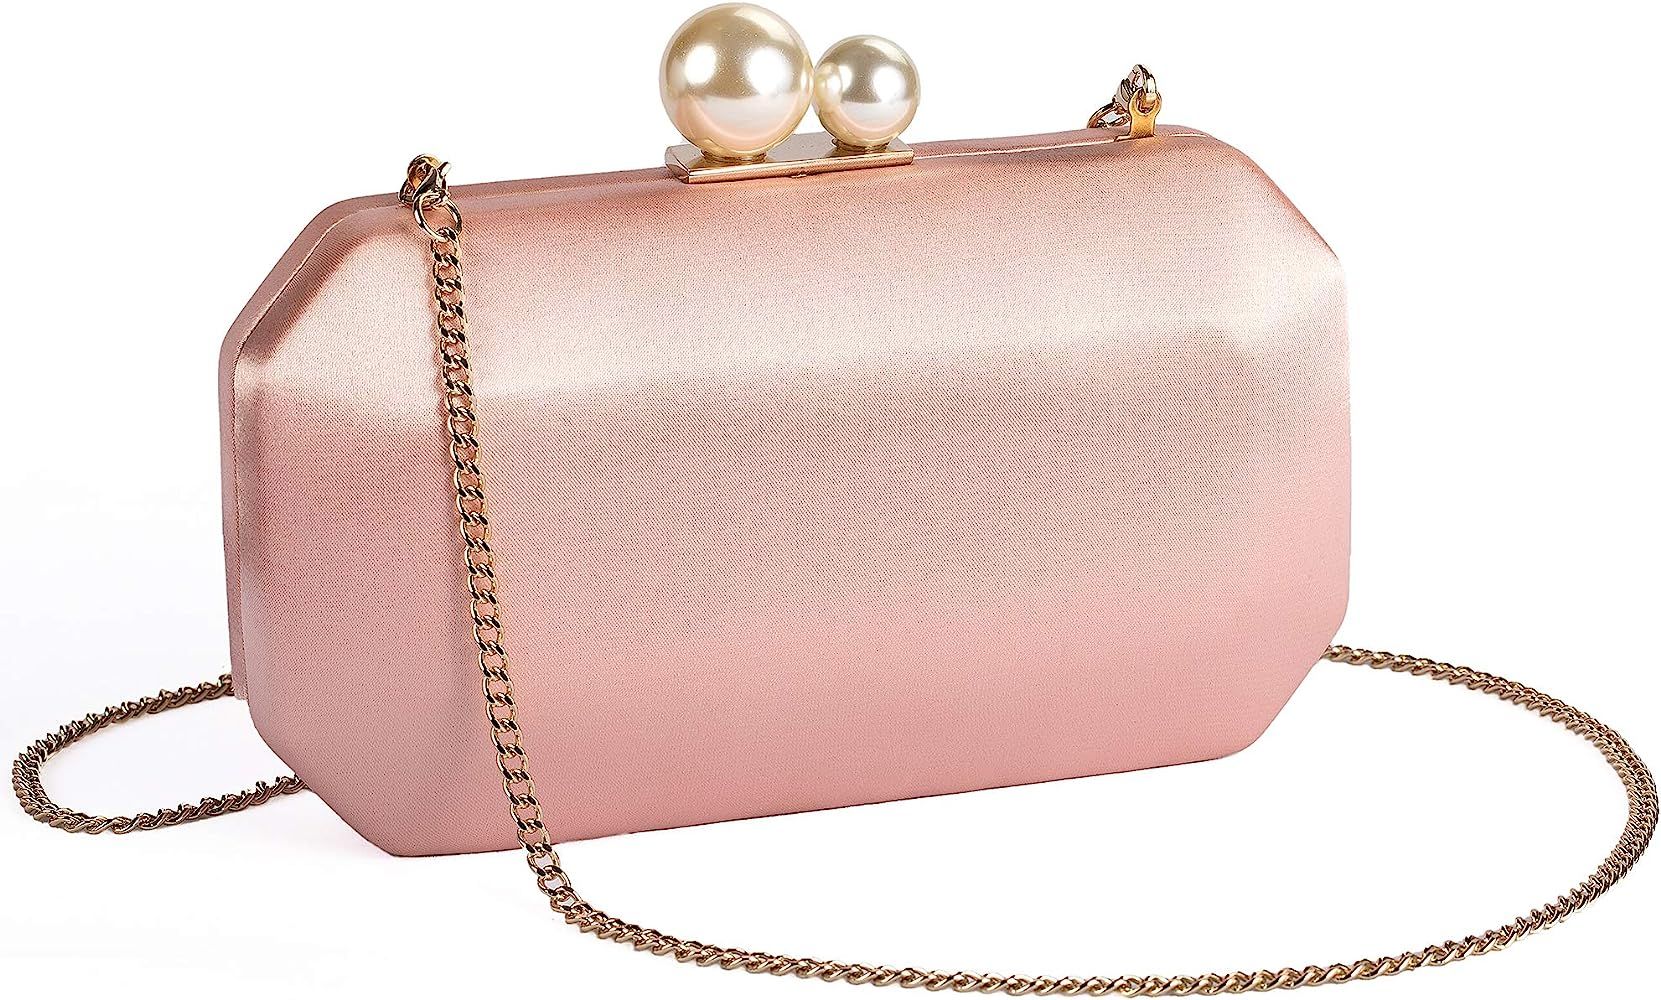 Women Satin Clutch Purse Handbags/Crossbody Hardcase Evening Bag with Pearls Closure for Party | Amazon (US)